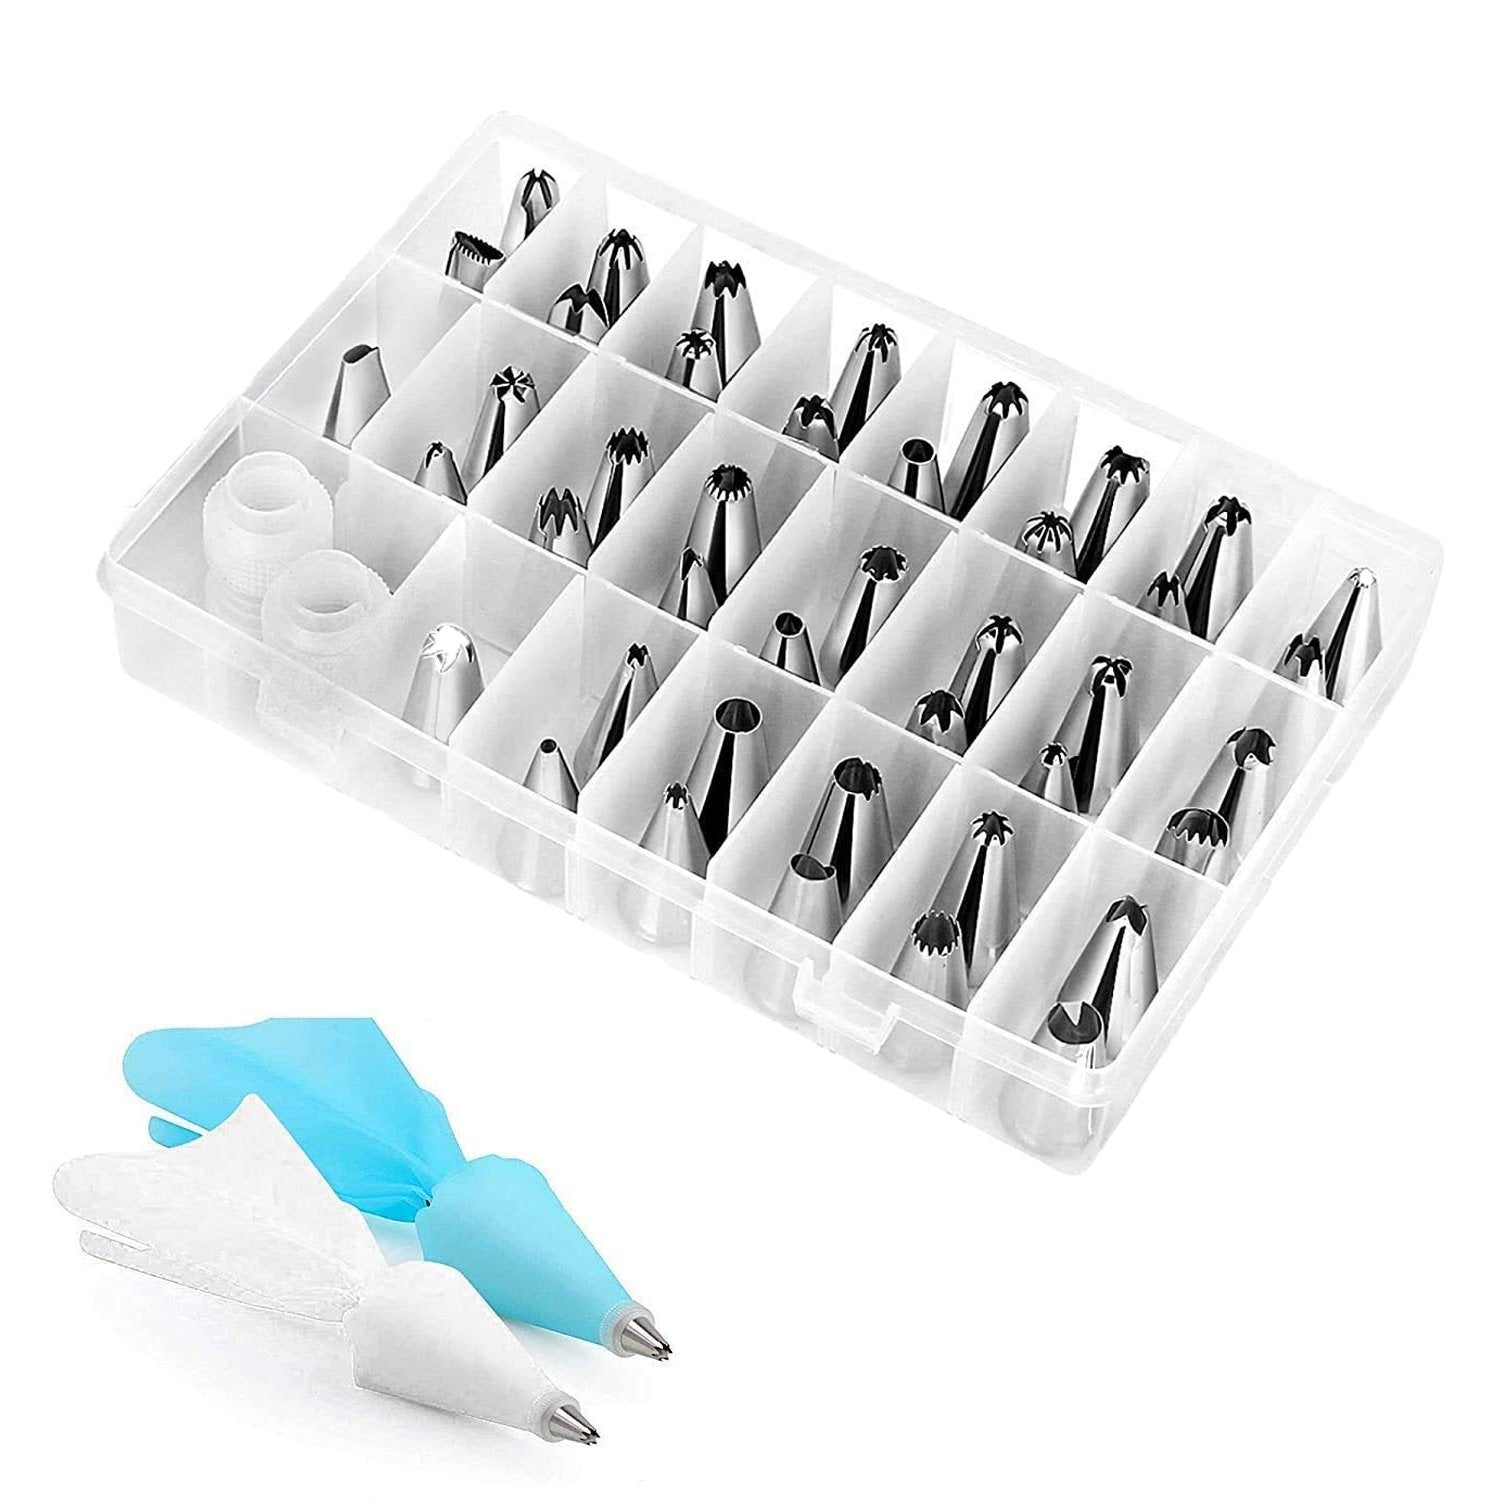 0812 Cake Decorating Kit with Reusable Plastic Couplers Piping Nozzle Set - SkyShopy